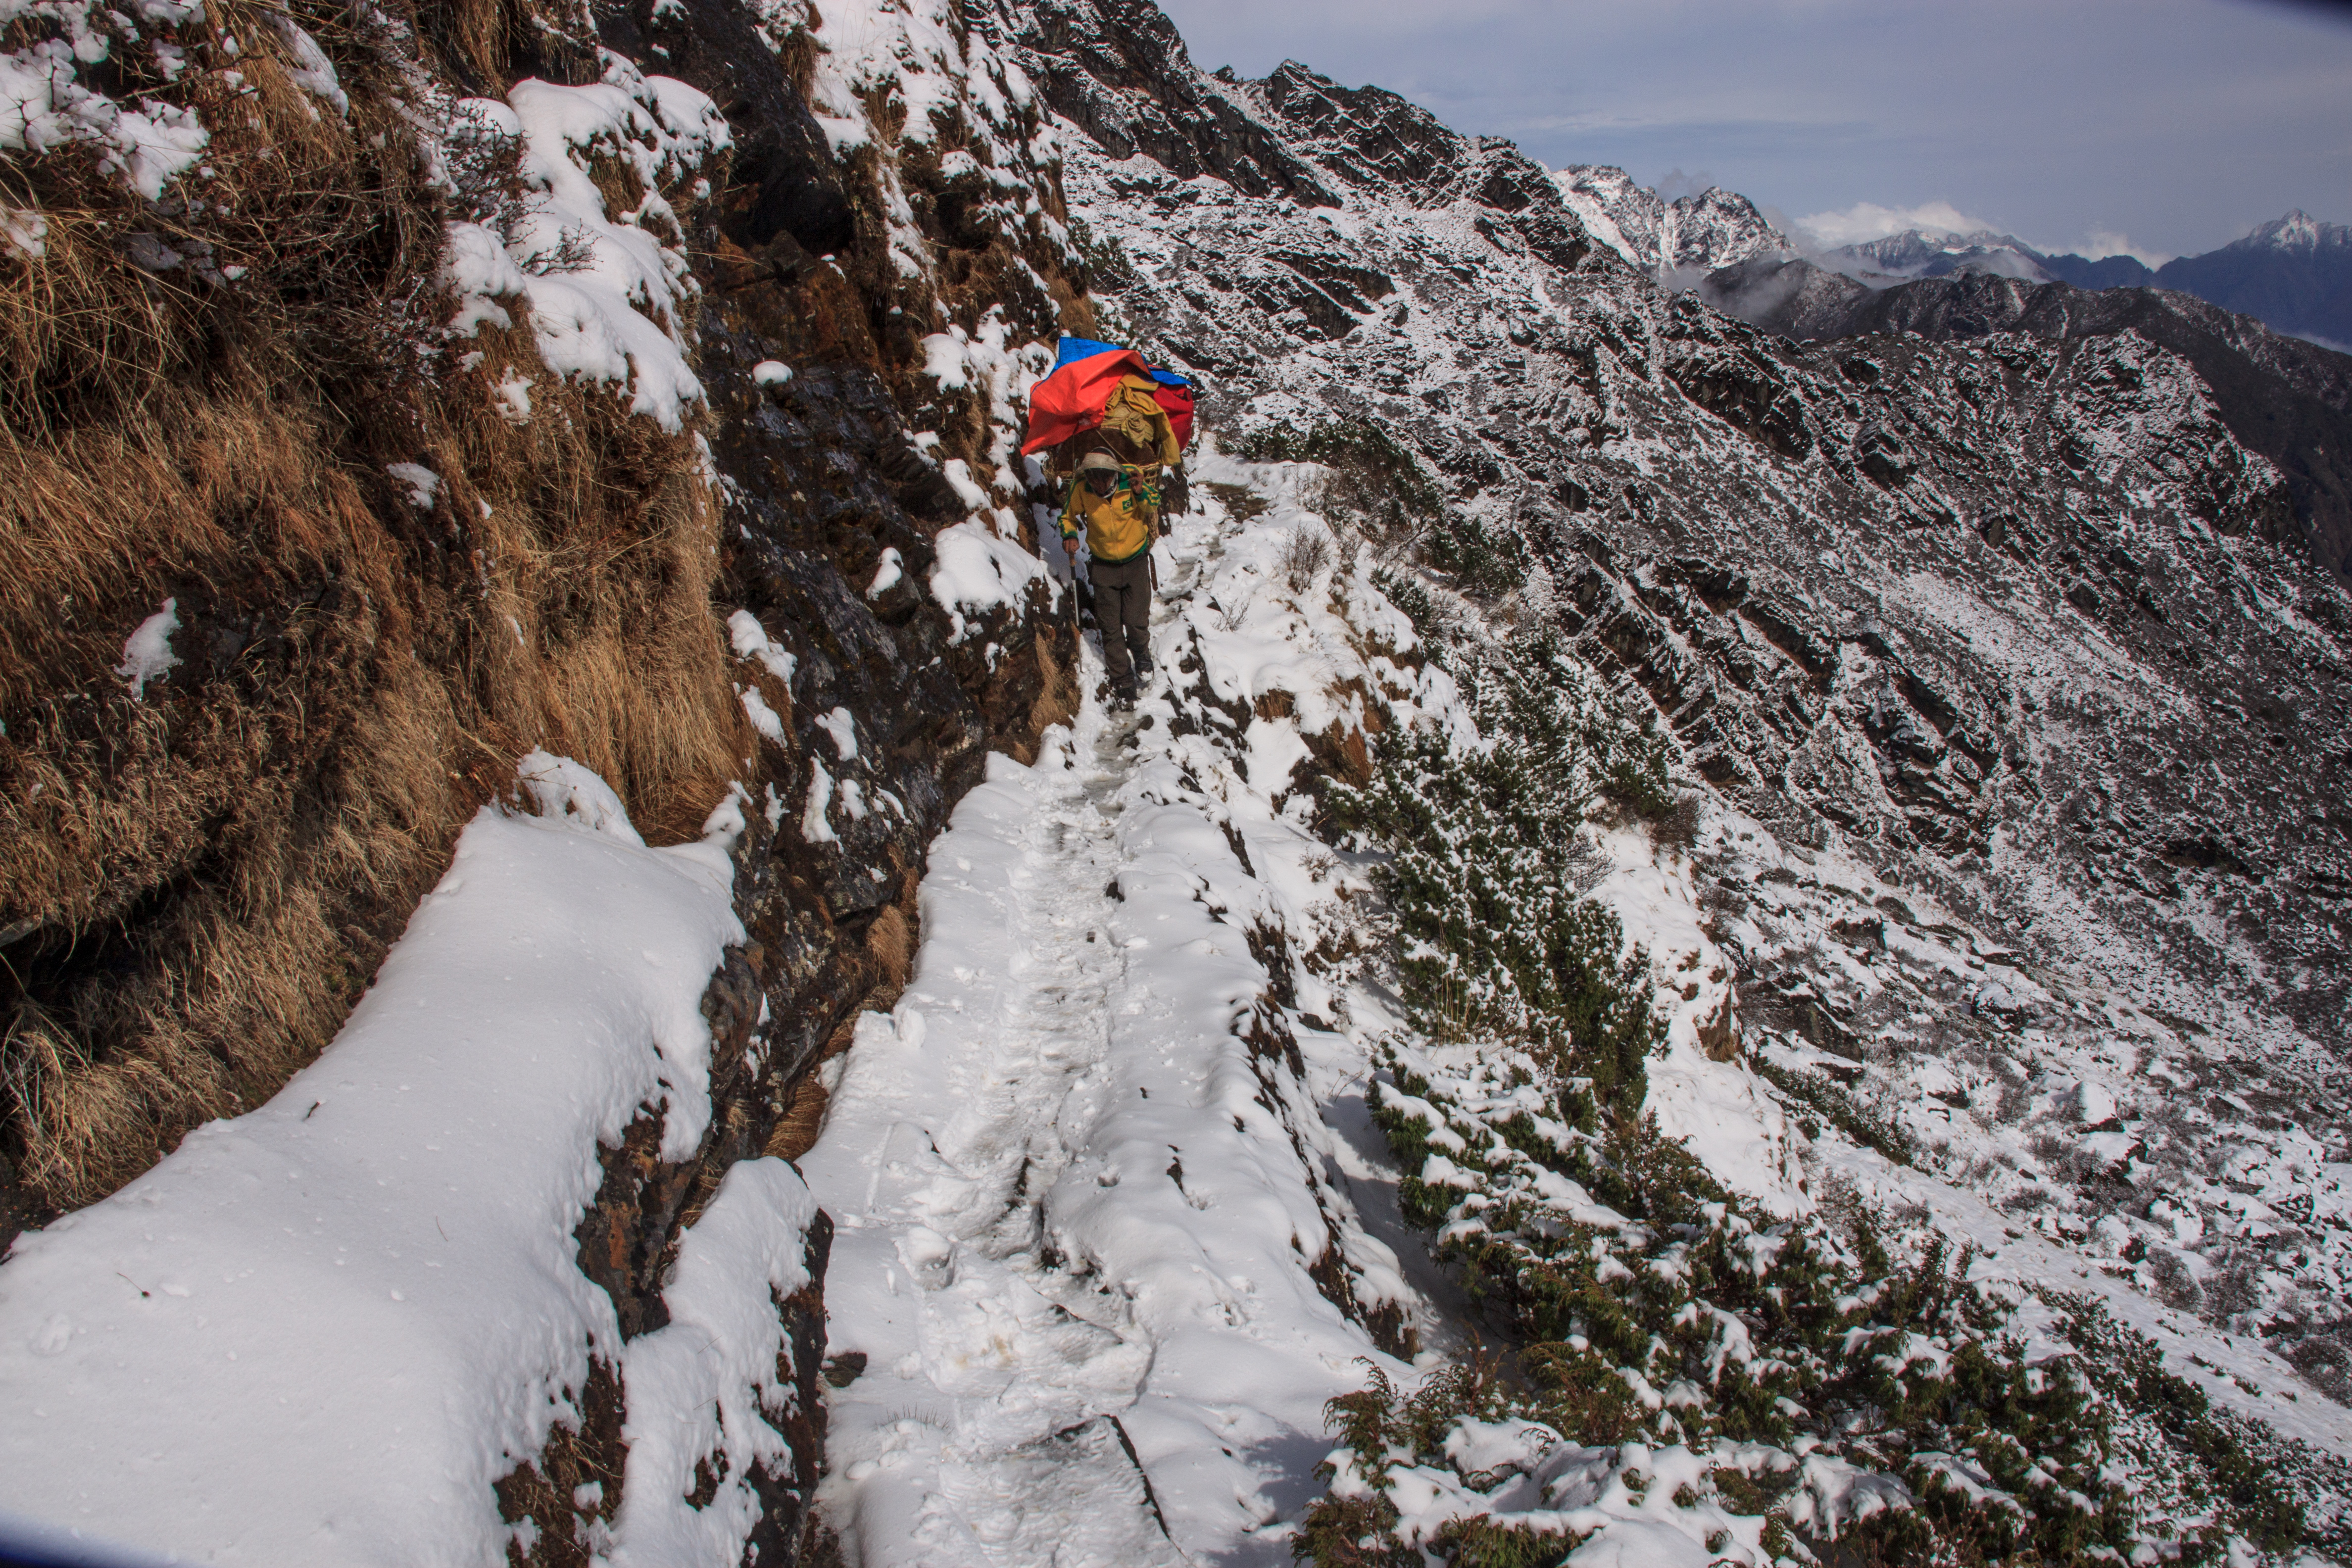 One of our porters on the narrow and icy path to the Zatrwa La.